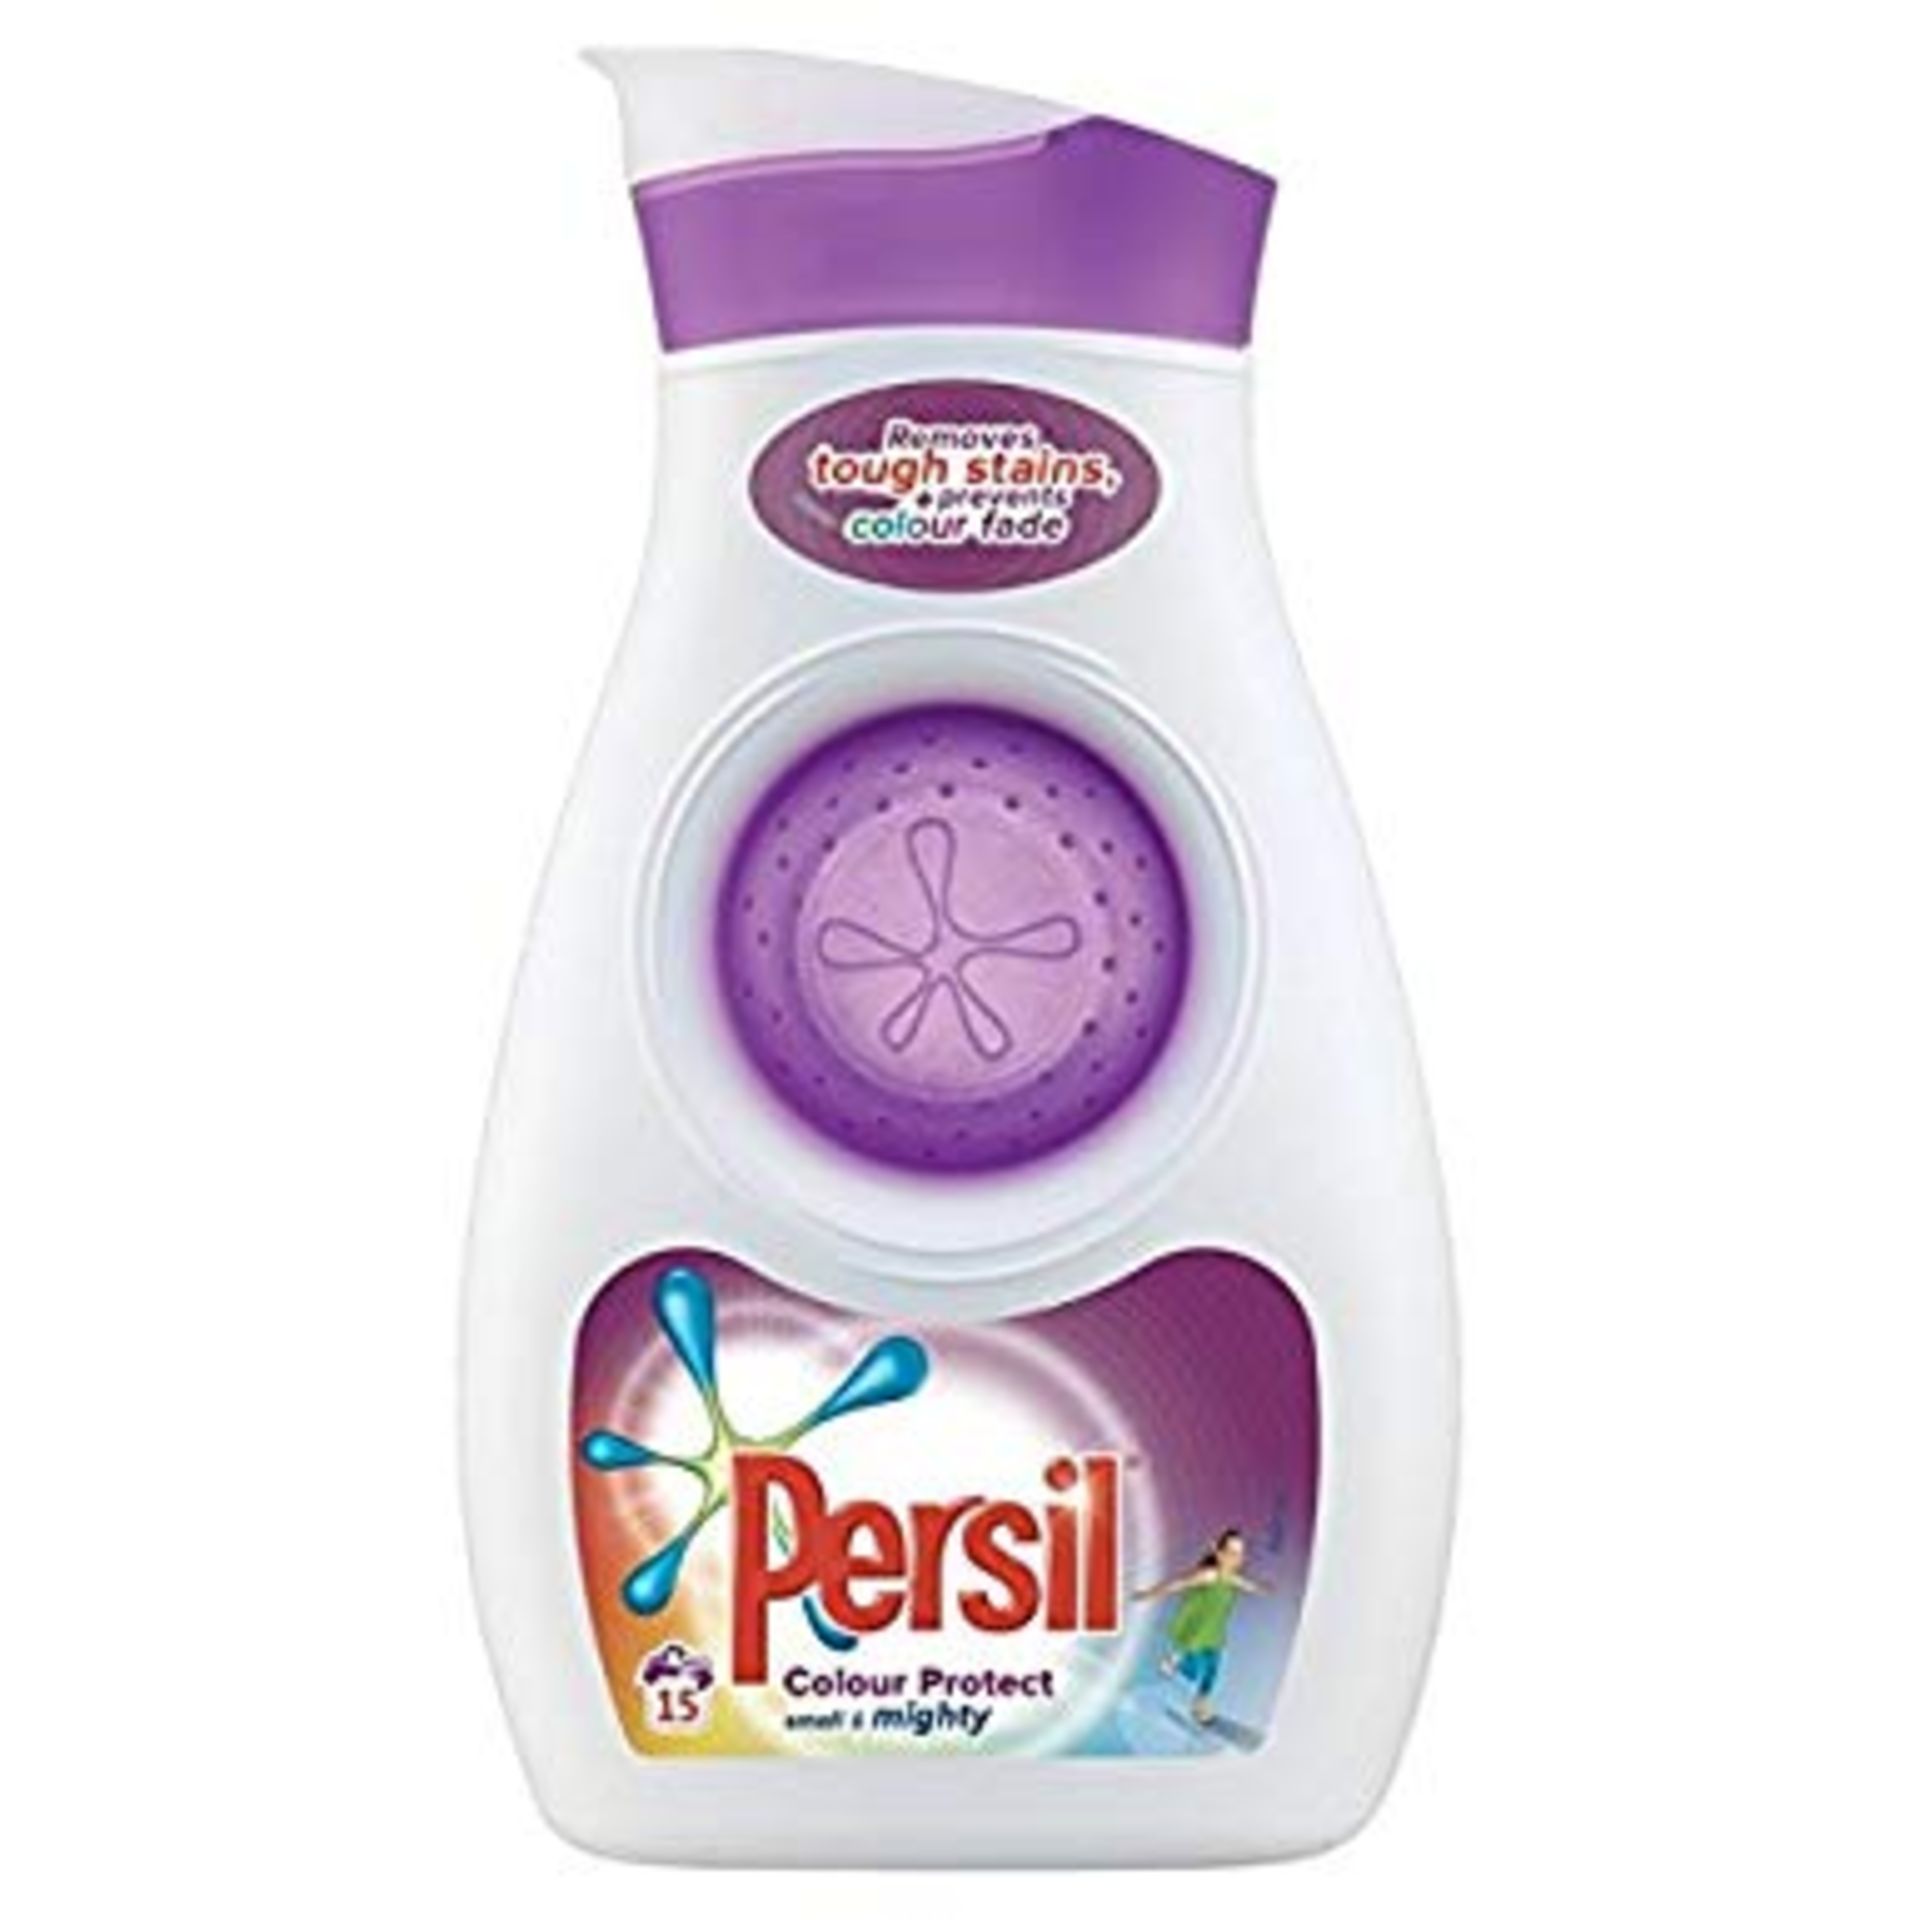 V Brand New Persil Small & Mighty Liquid + Colour And Fibre Care - 15 Wash - Tough On Stains - Image 2 of 2